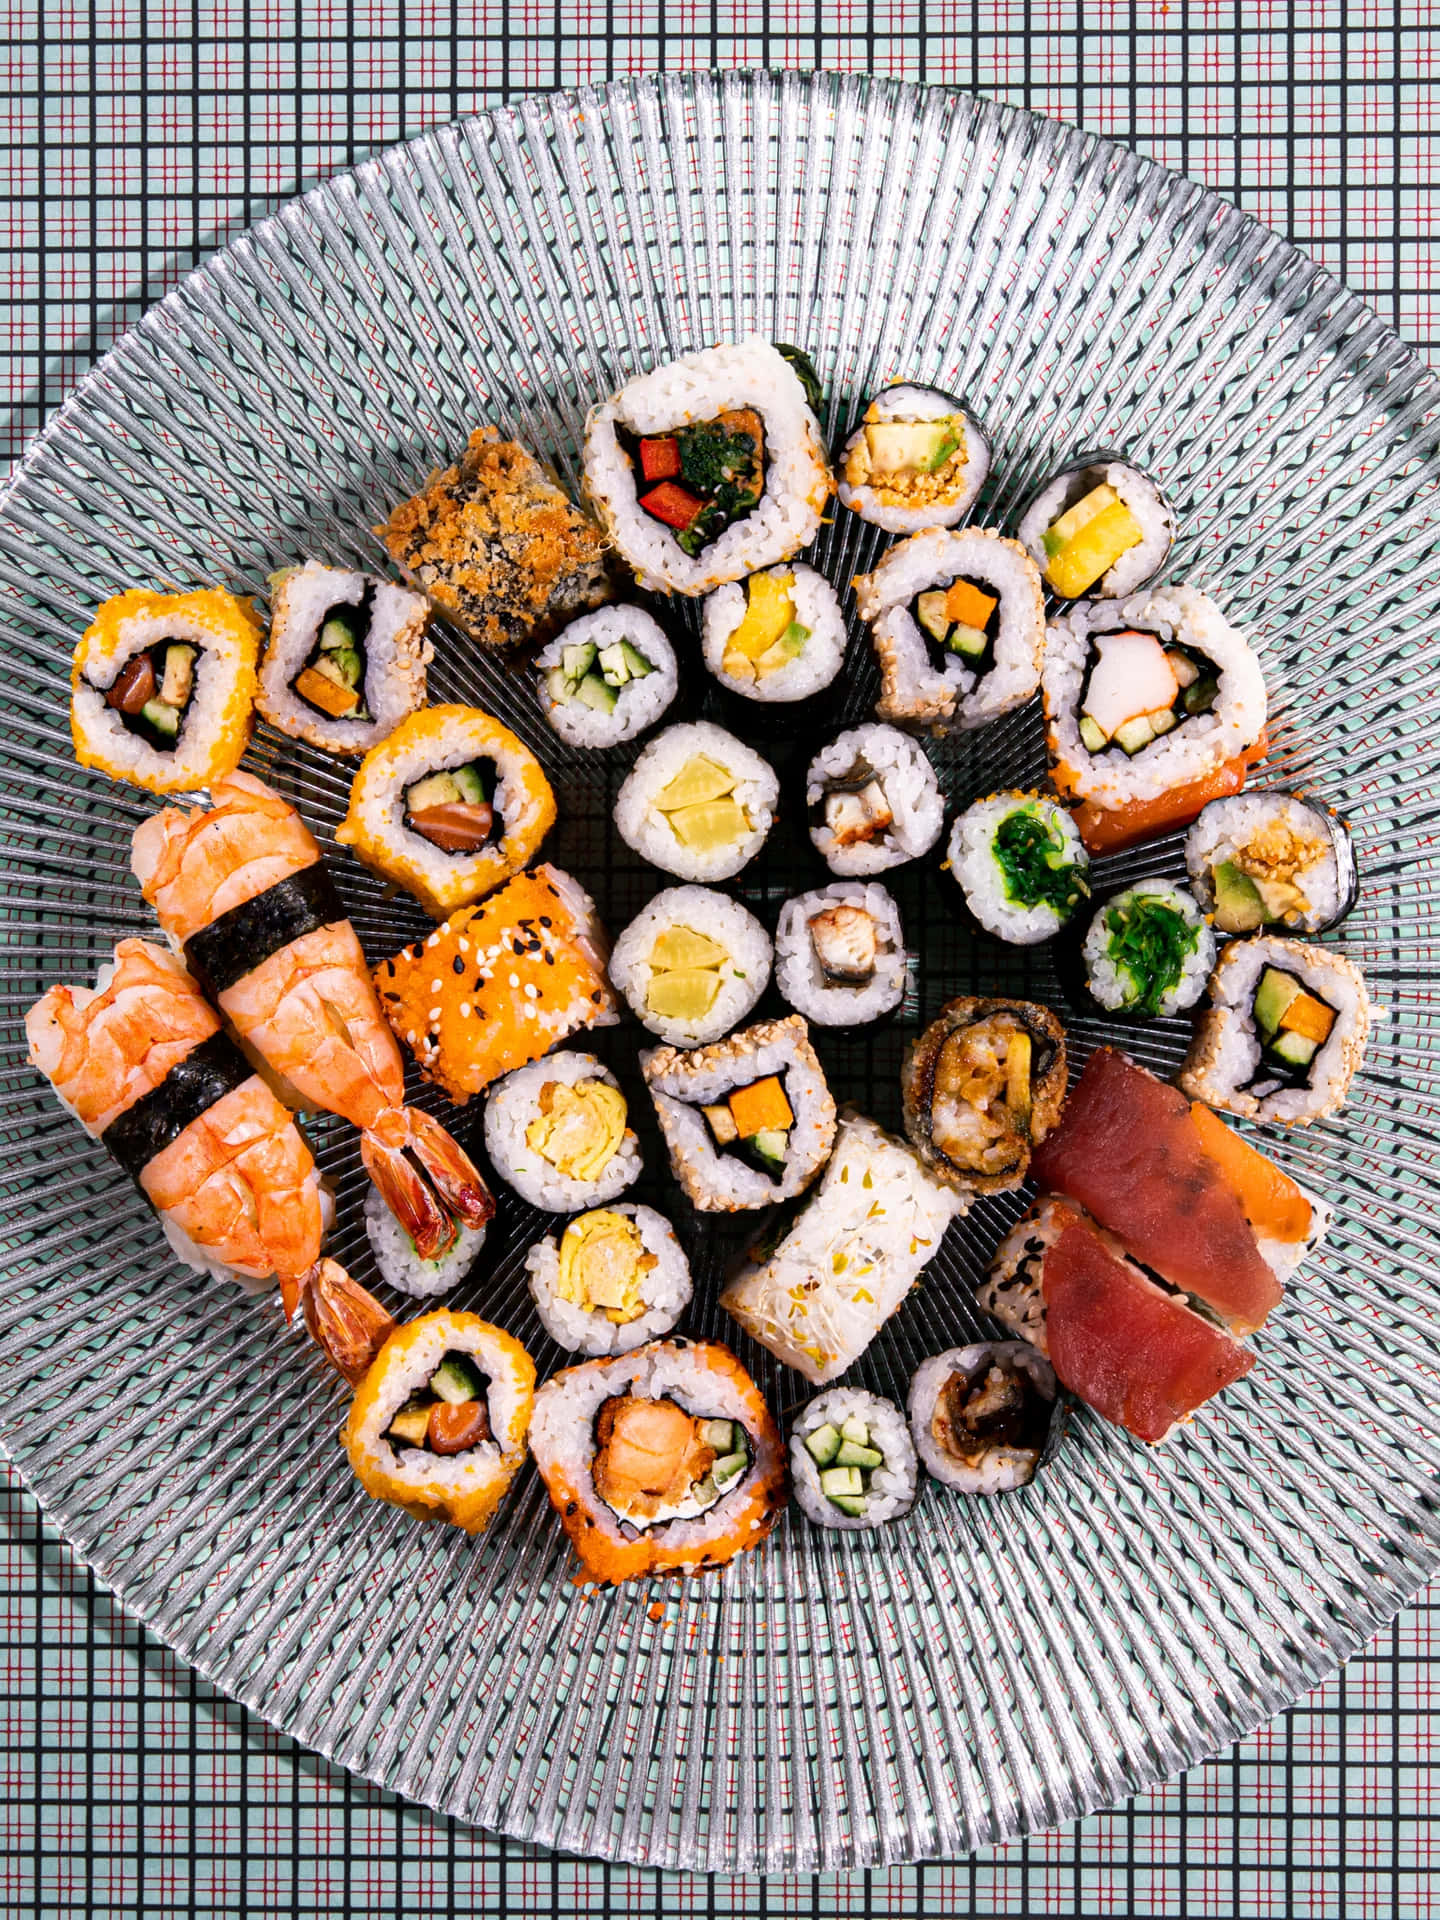 Types Of Sushi On Glass Plate Picture